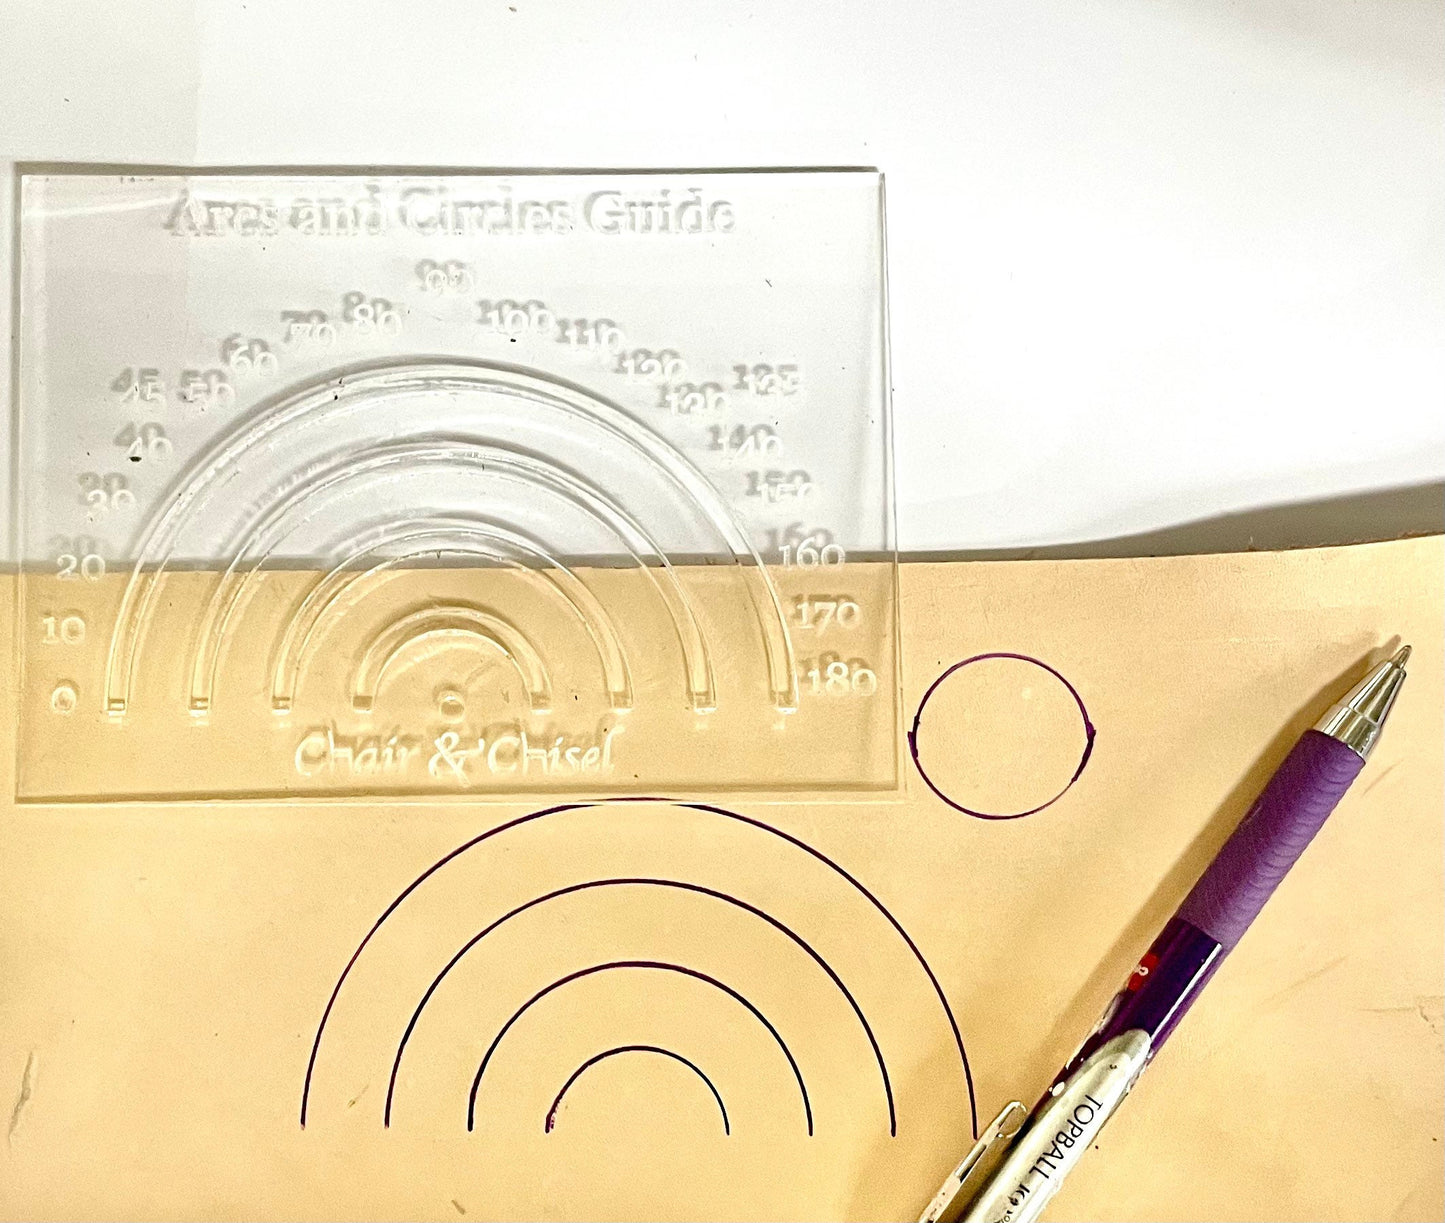 Arc and Circle tracing guide - 1-6” Circle guide - Acrylic Leather template - Leather pattern - spacing guides